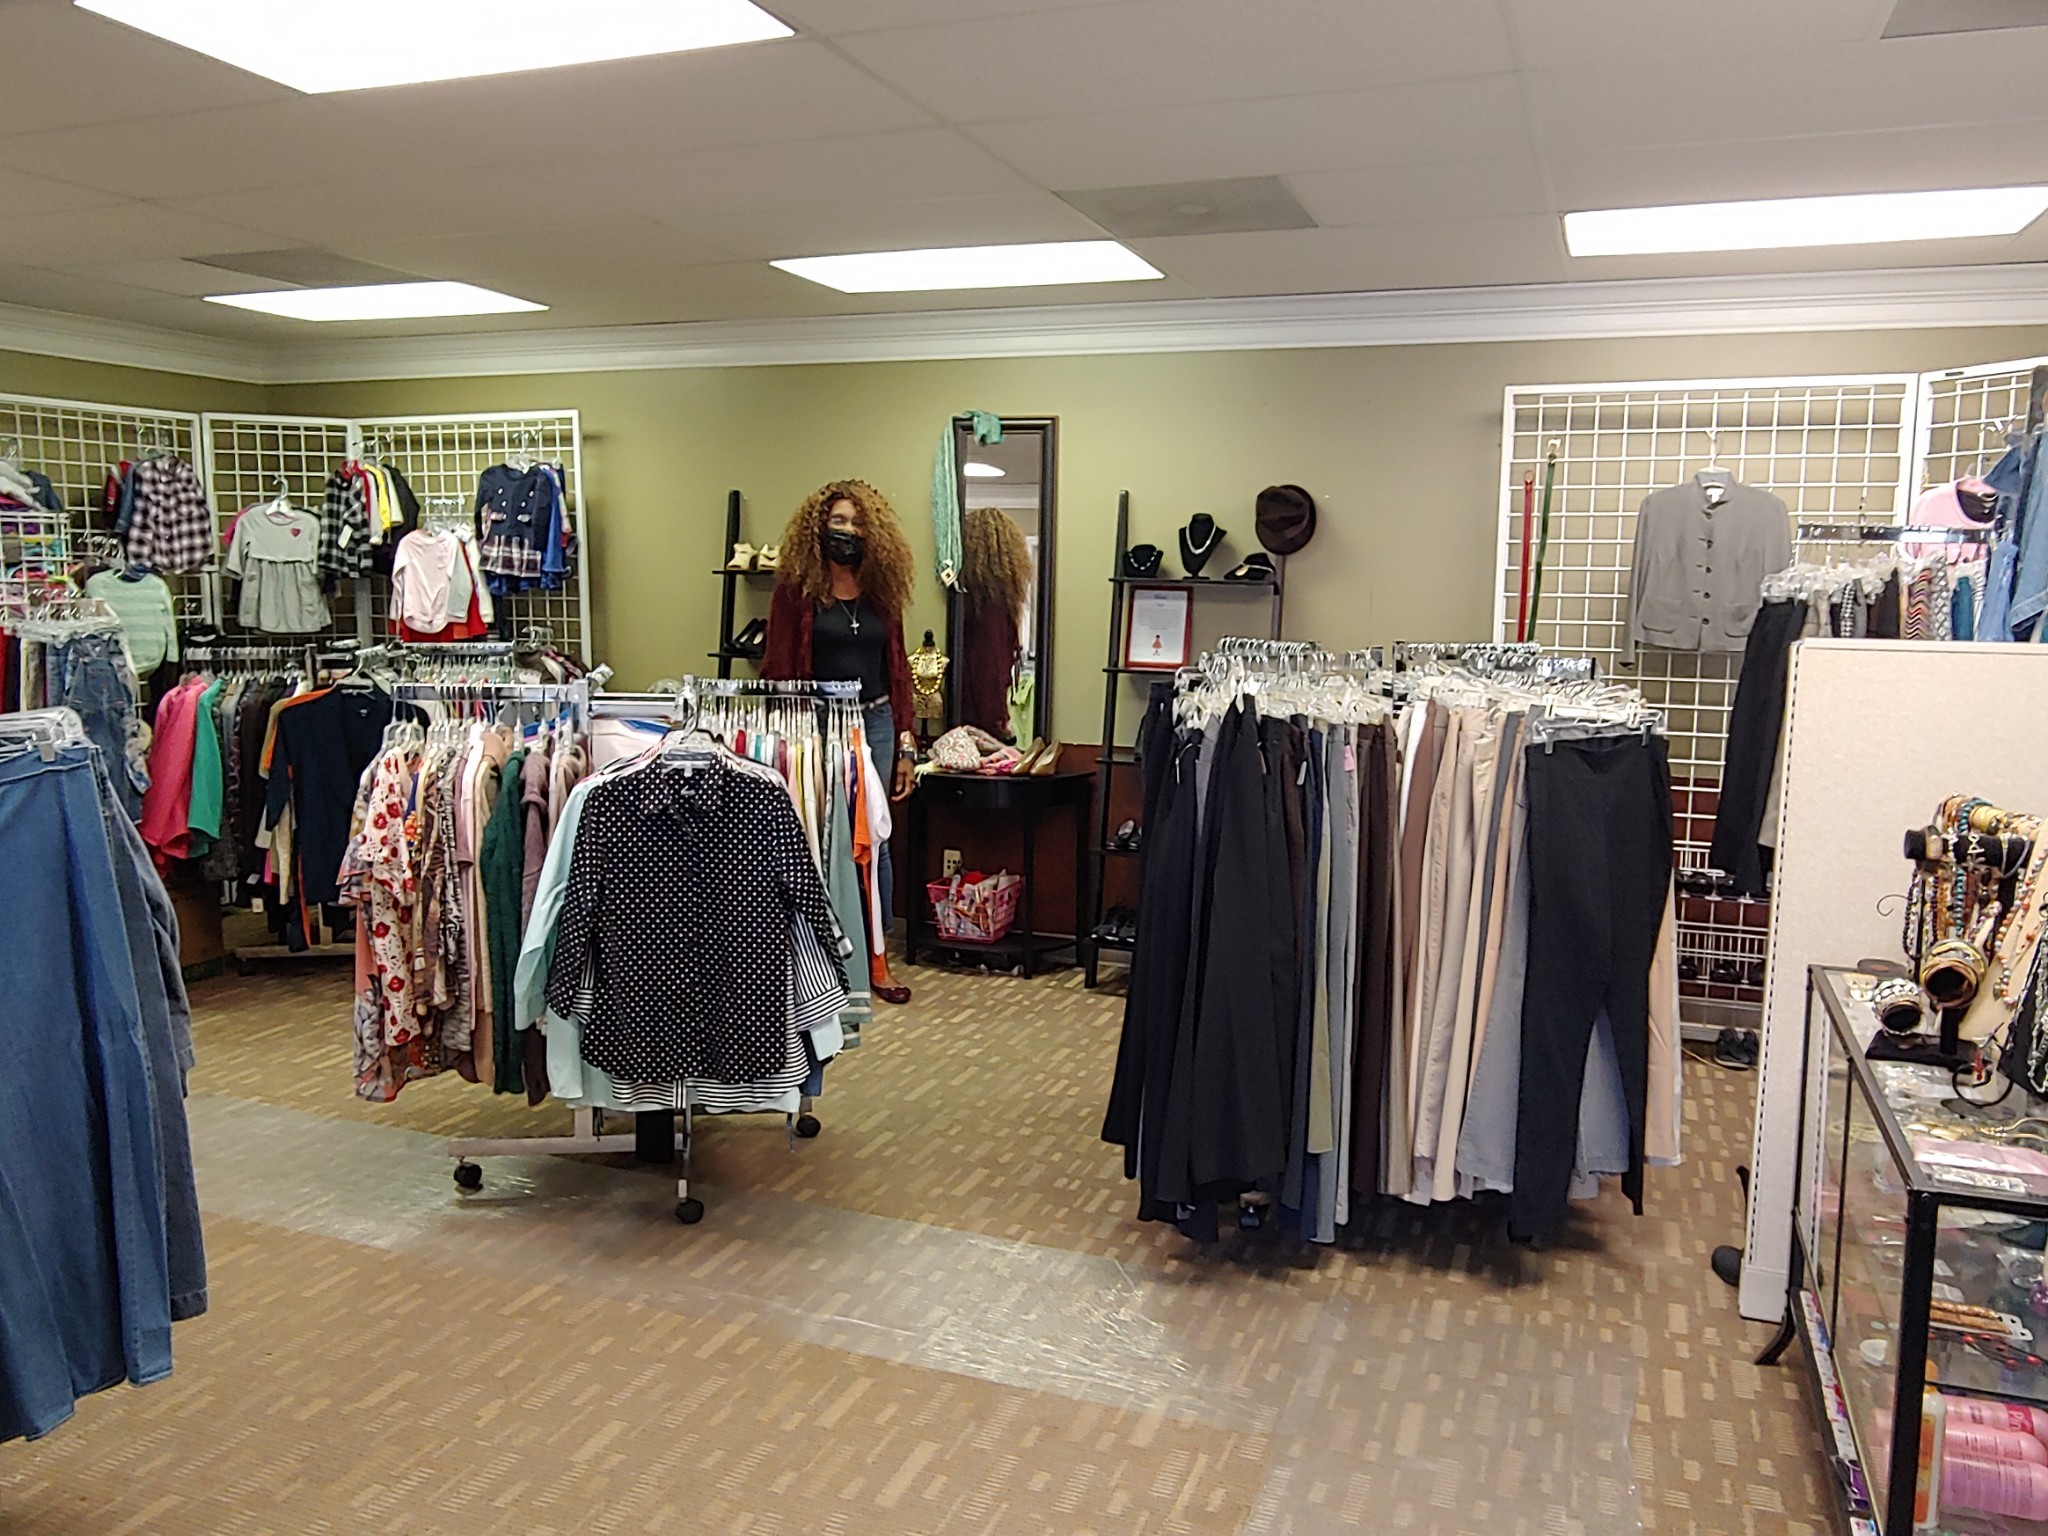 Kingdom Closet & Boutique: Local Gem & Great Place to Donate Clothing